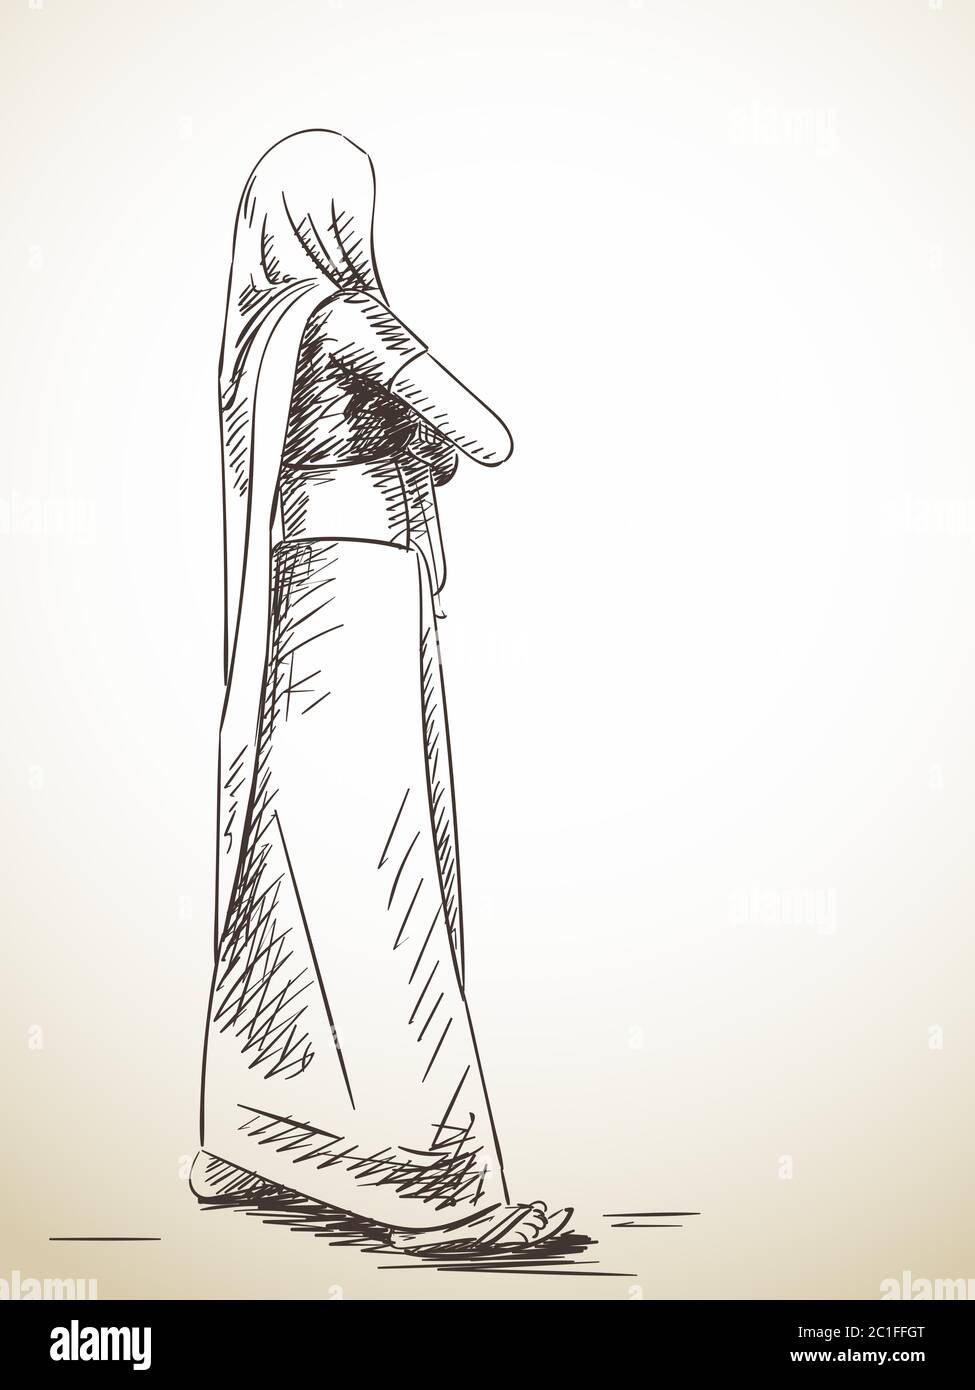 Download A Drawing Of An Indian Woman In A Sari | Wallpapers.com